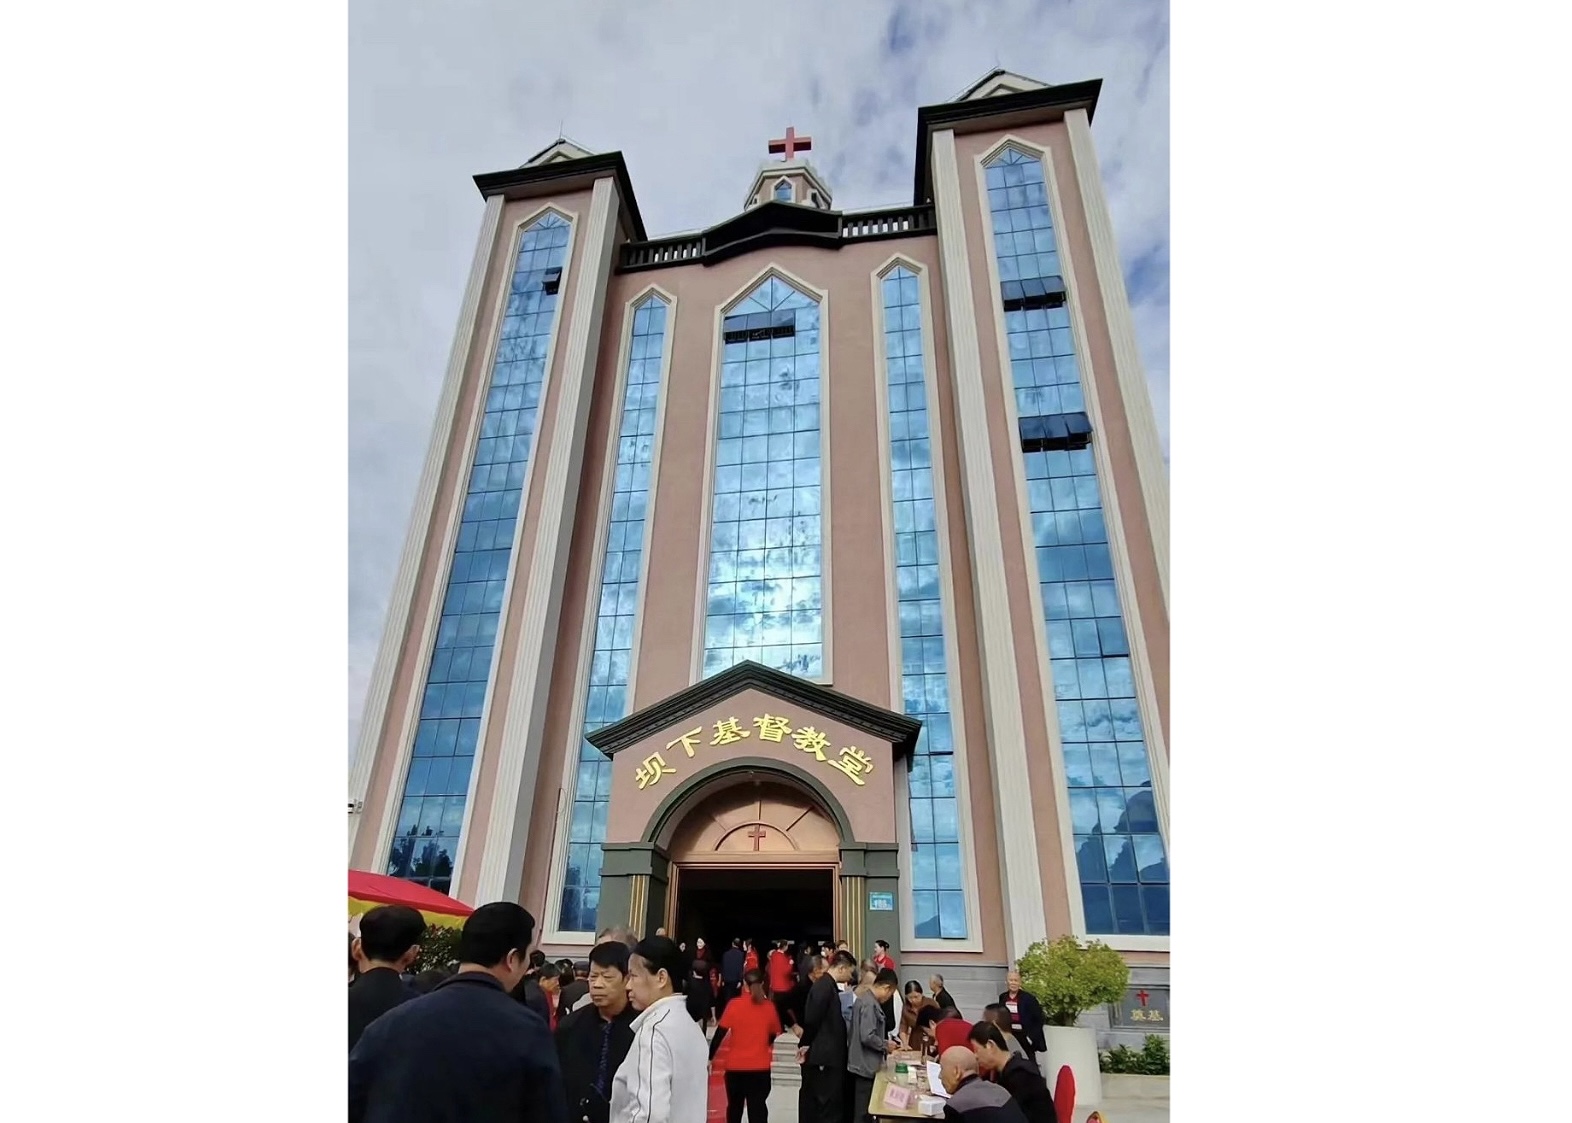 The Baxia Church conducted a dedication ceremony after a decade's construction in Bangtou Town, Xianyou County, Putian City, on November 16, 2023.